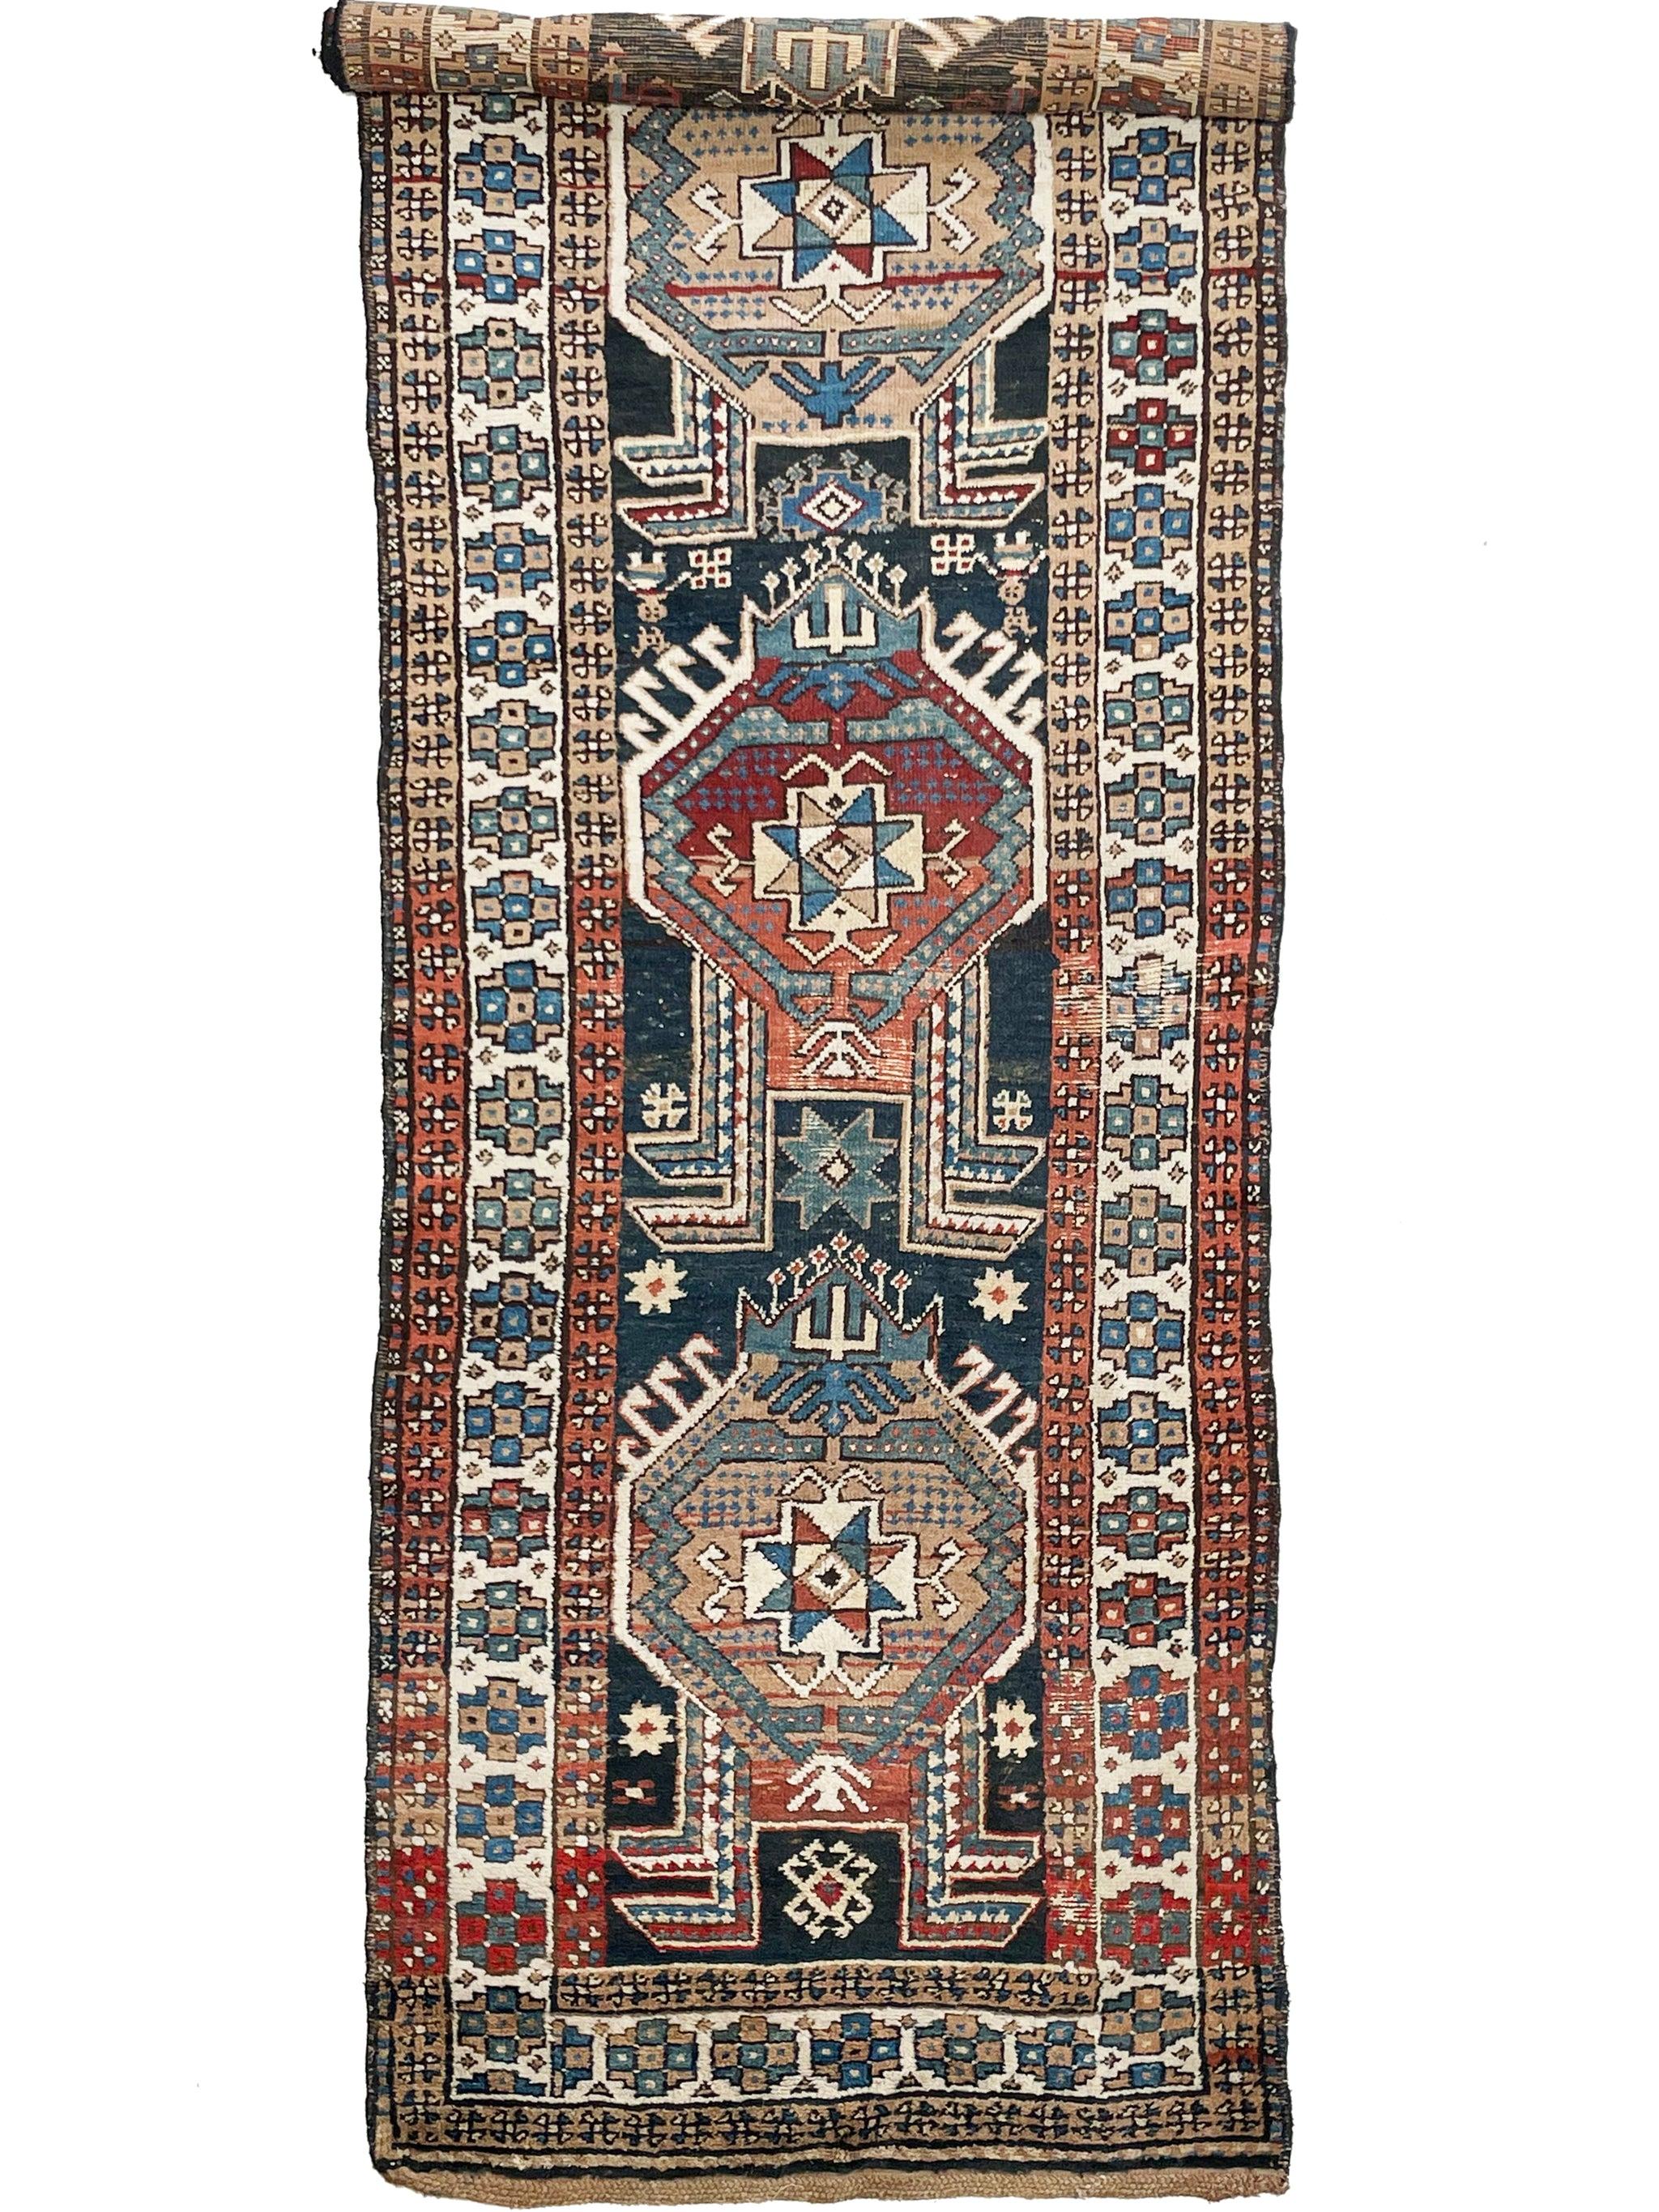 Incredible Wide Antique Caucasian Runner  Mystical Beauty With Warmth & Earthy Hues

About: One of the best runners - the perfect balance of warmth, cool, and earthy.  This piece has all earthy caramels, sand, taupe, chestnut, almond, and even